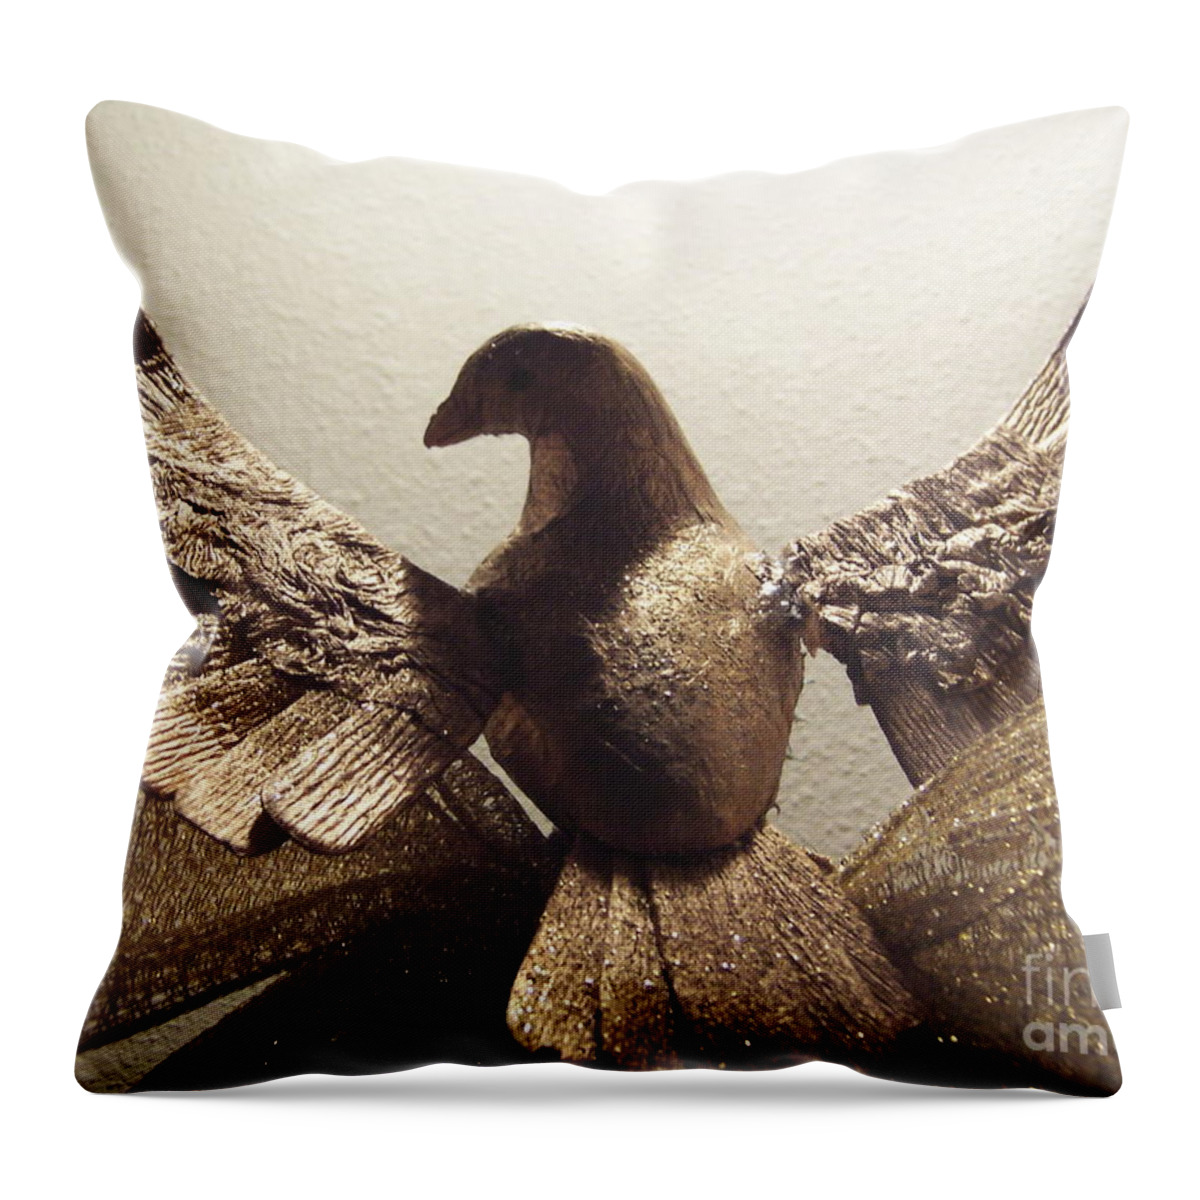 Dove Throw Pillow featuring the photograph Peace by Vonda Lawson-Rosa